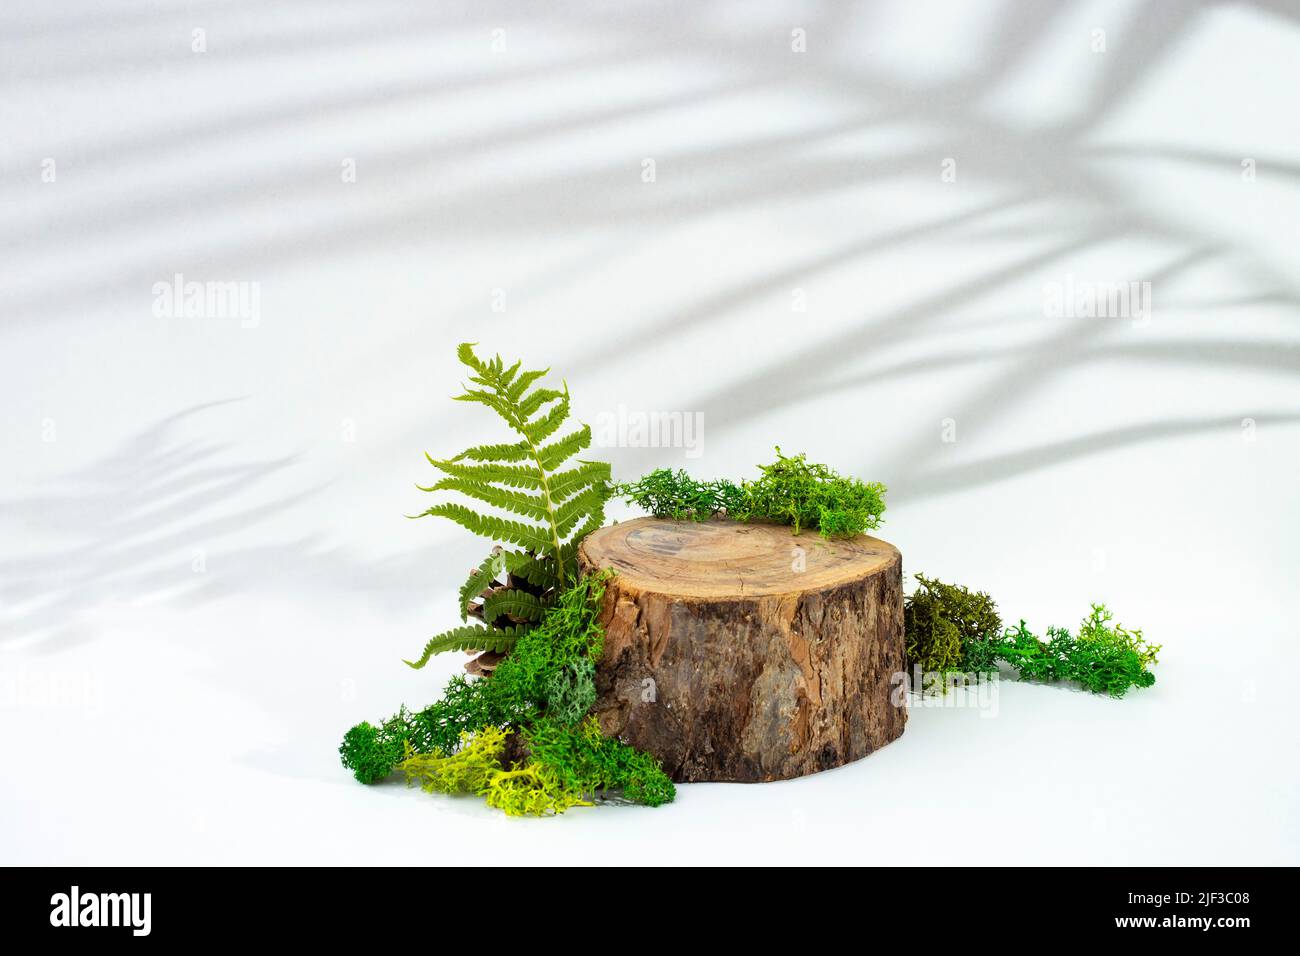 Tree stump surrounded by moss and fern leaves isolated on white background with palm shadows. Product display template. Stock Photo